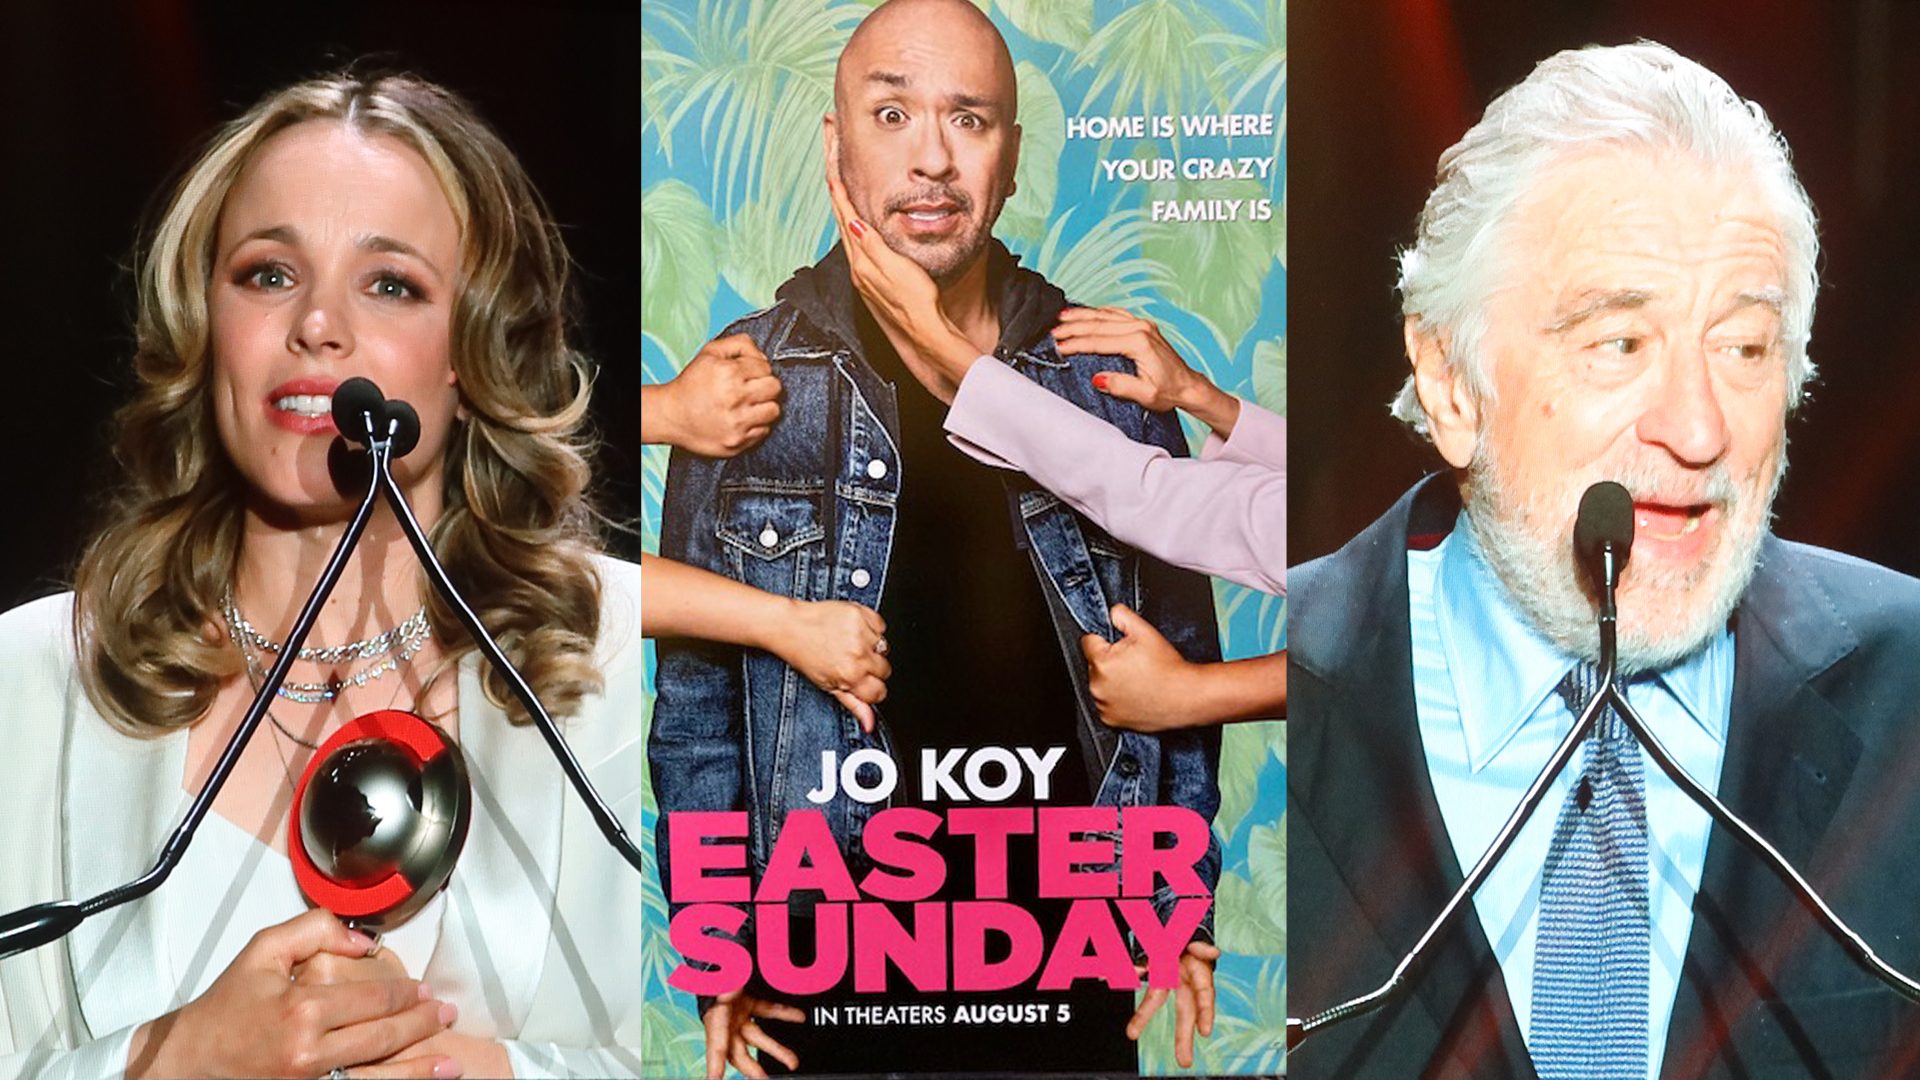 [Only IN Hollywood] Surviving Vegas with Keanu Reeves, Robert De Niro…and Jo Koy